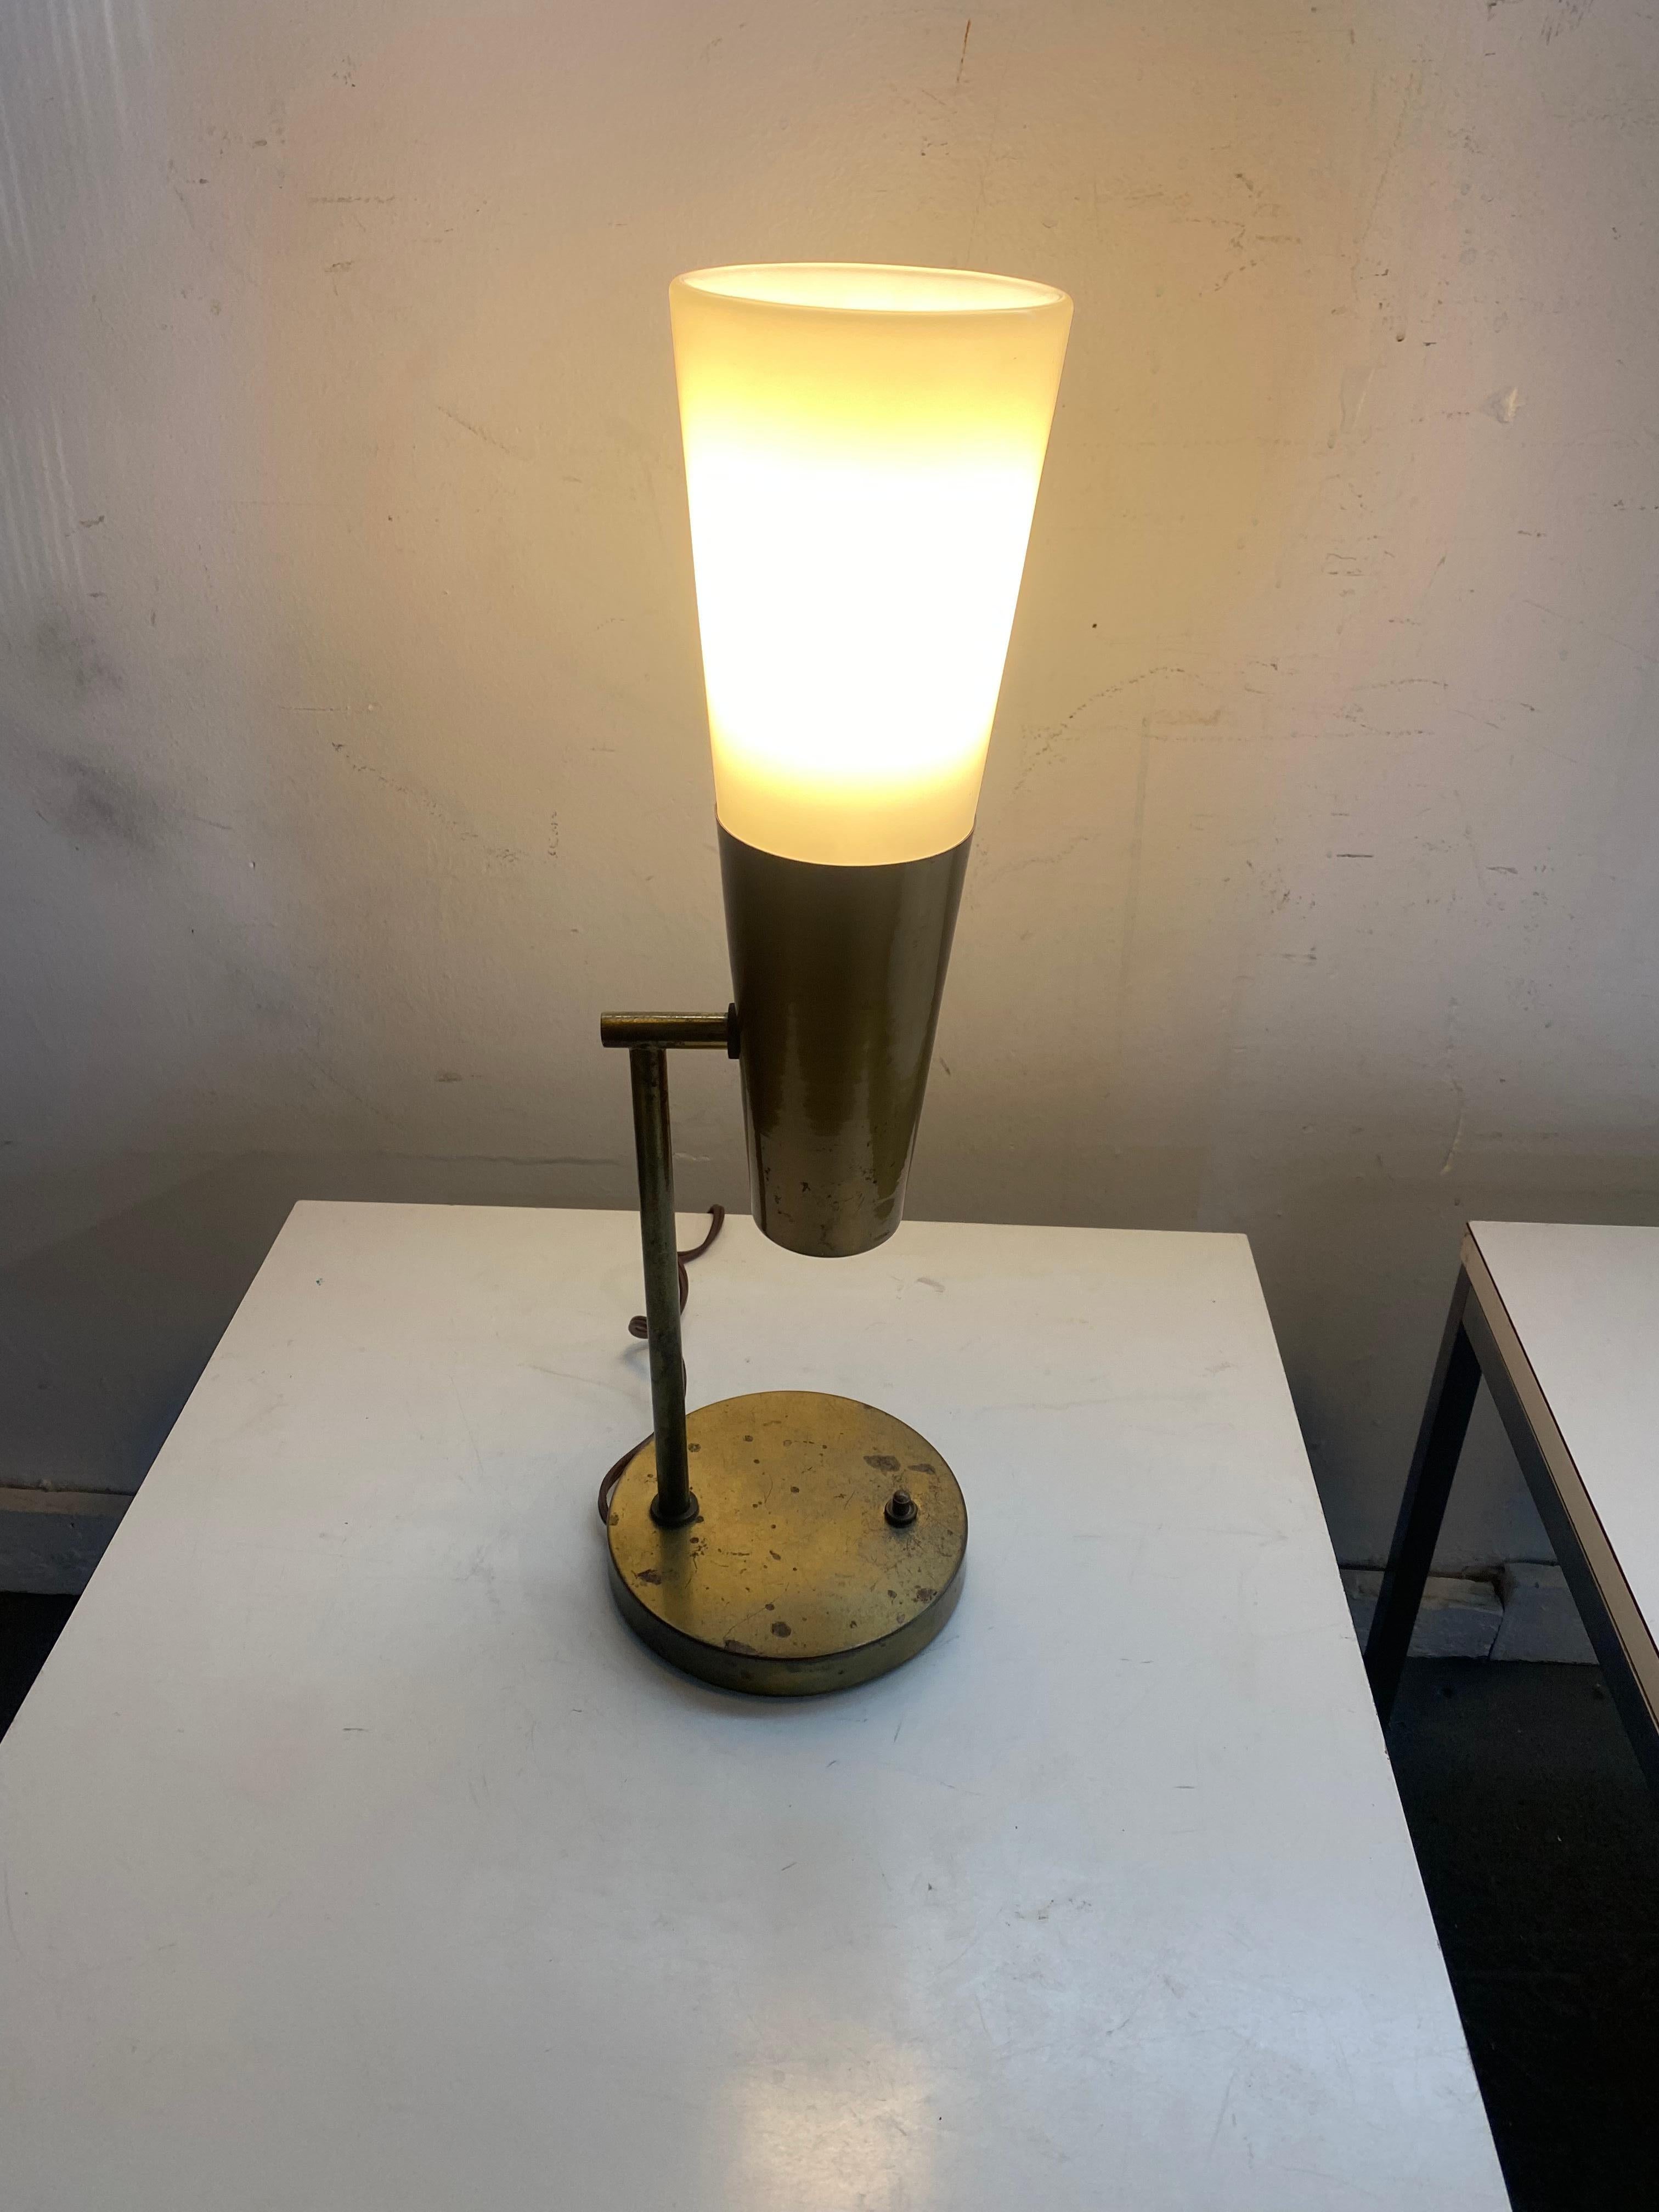 Rare Modernist Brass and Glass Lamp designed by Paul McCobb For Sale 3